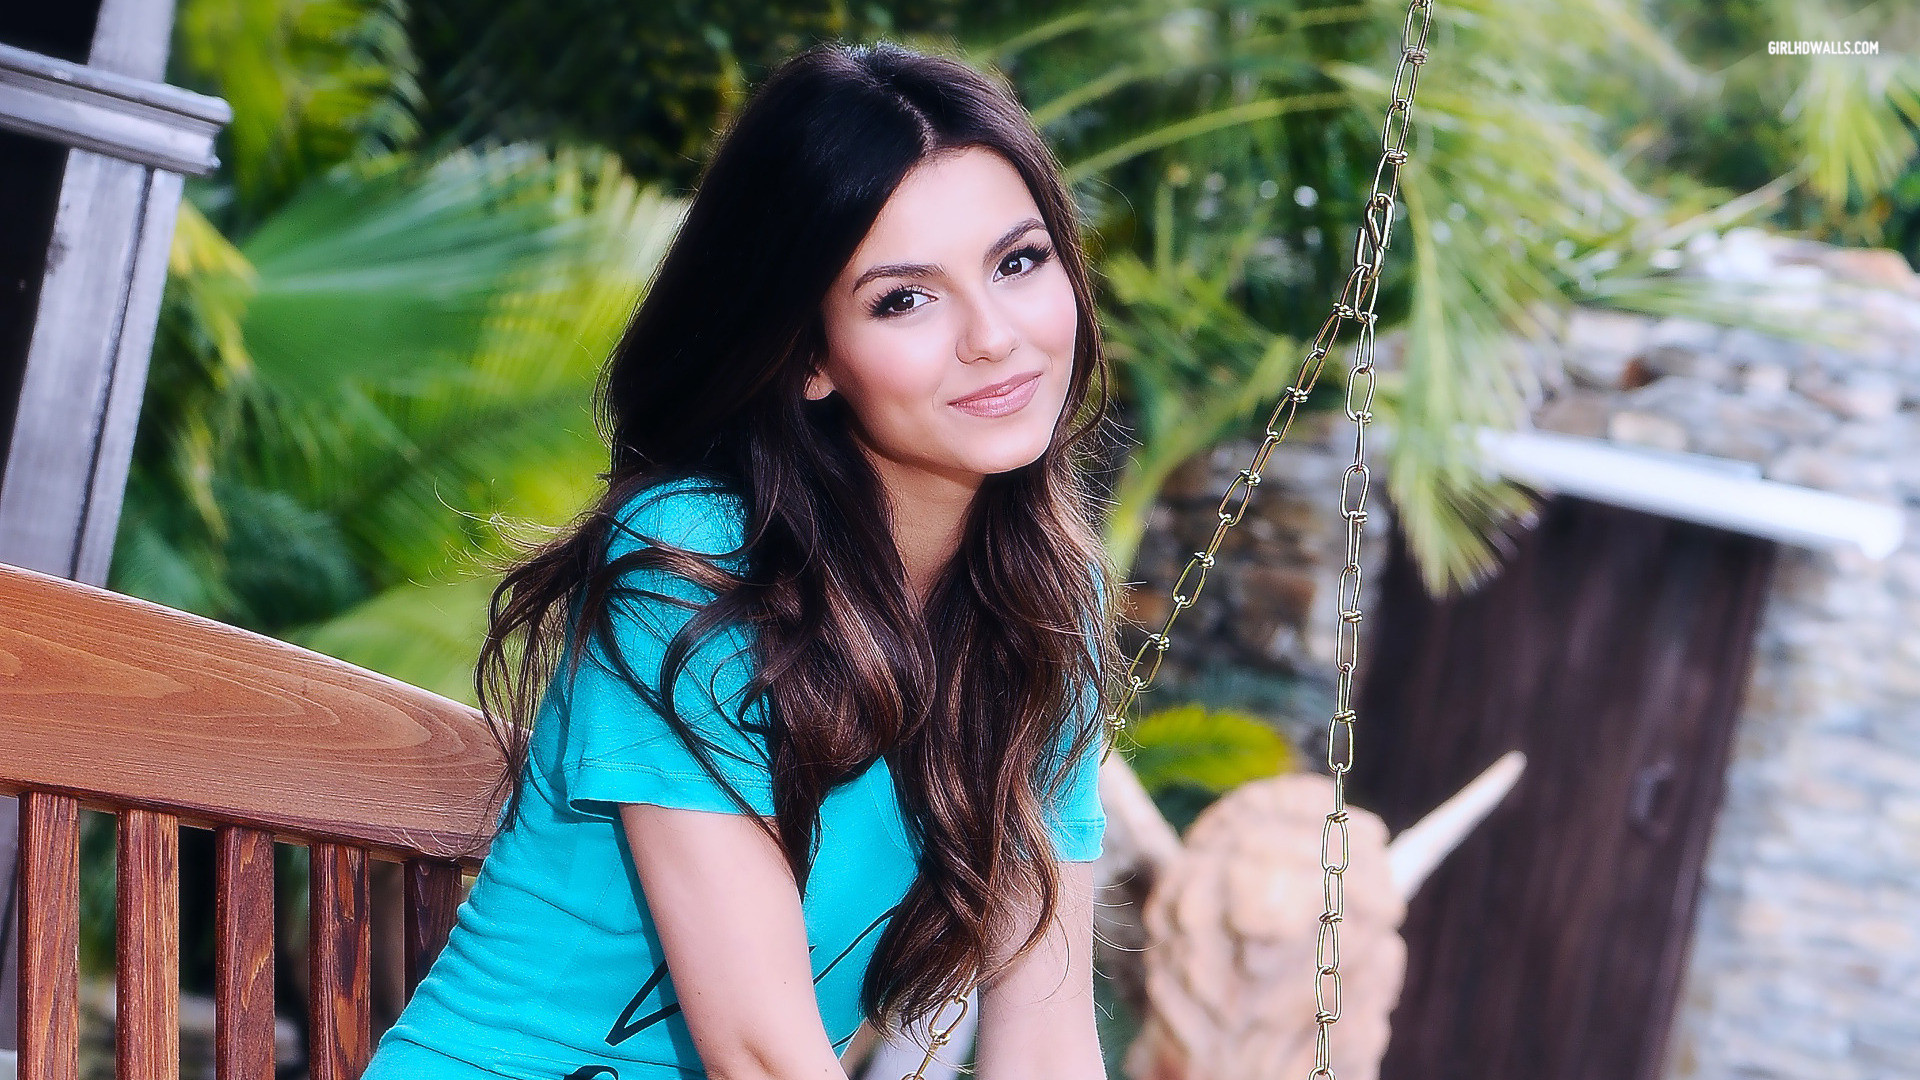 1920x1080 Victoria Justice HD Wallpapers Movie HD Wallpapers 1920Ã1080 Victoria  Justice Pictures Wallpapers (49